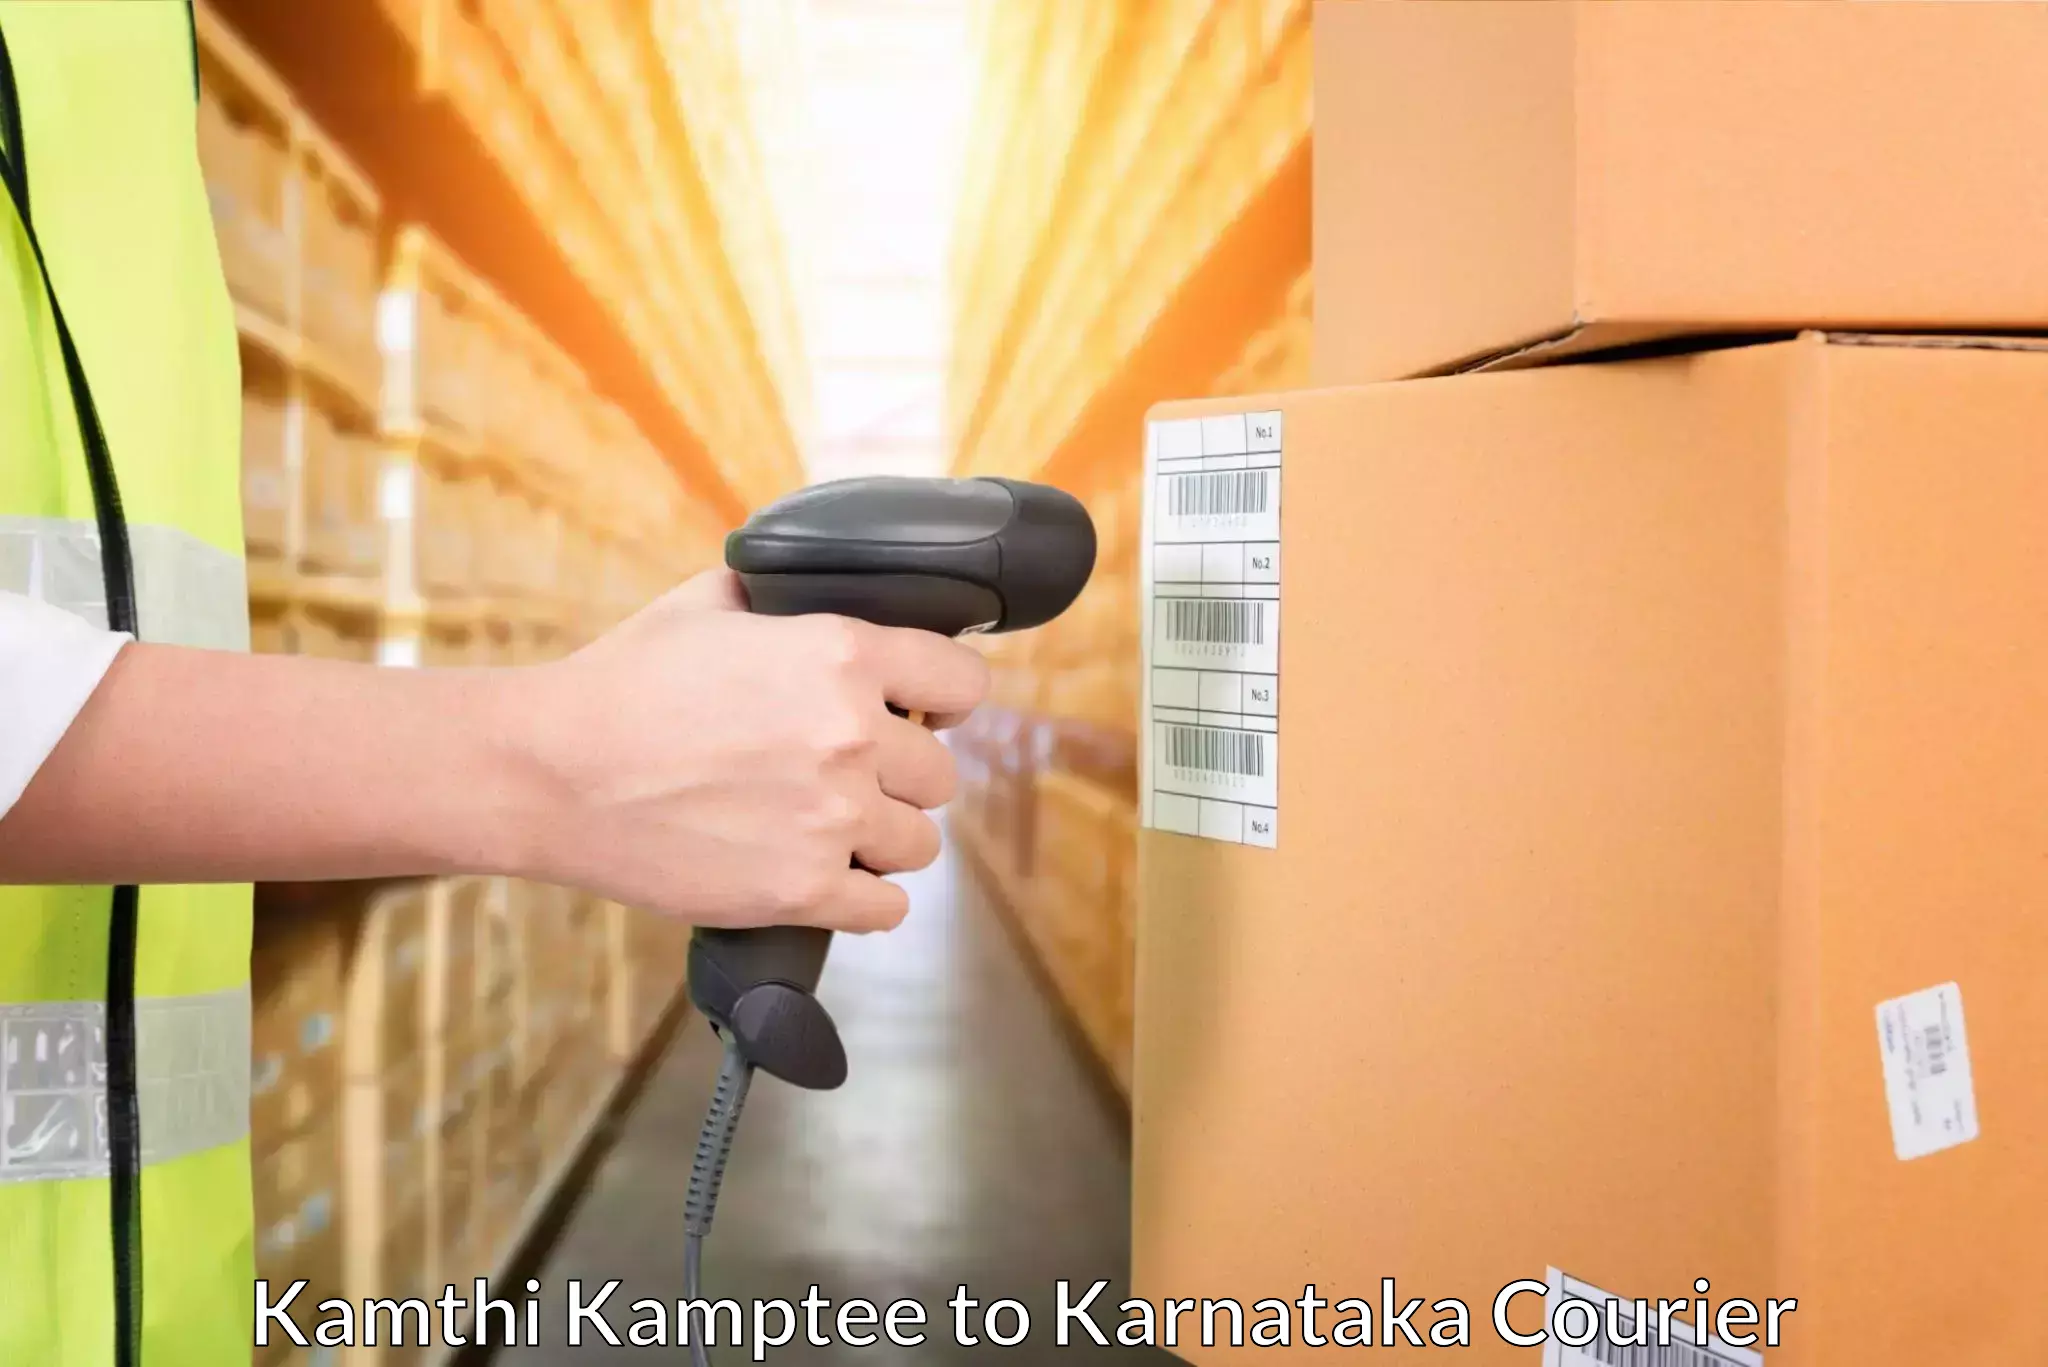 On-call courier service Kamthi Kamptee to Gundlupete